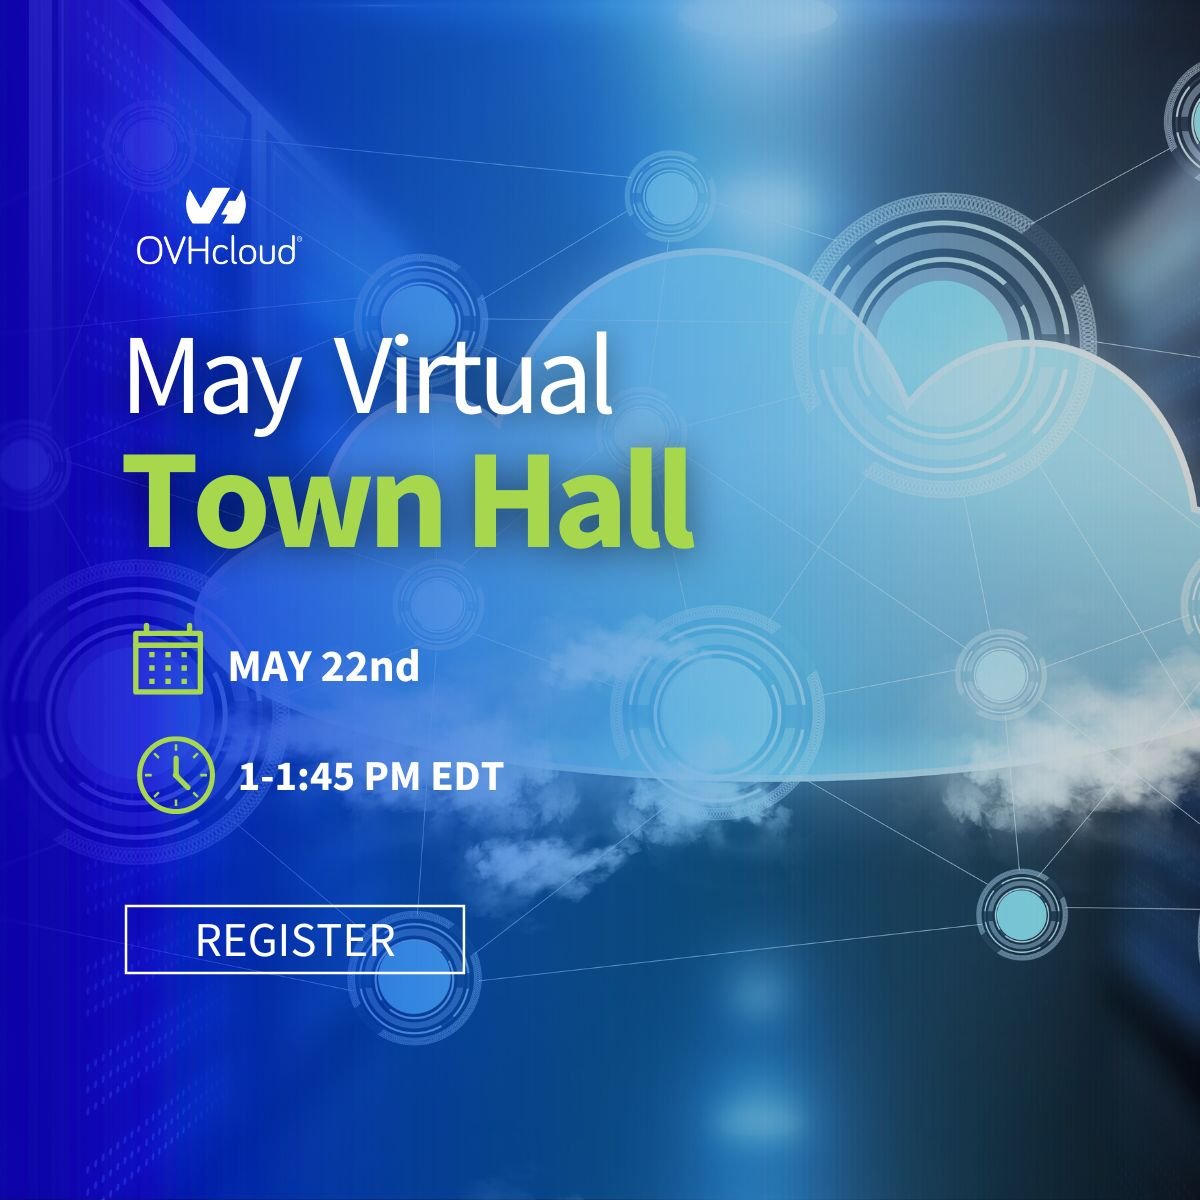 ✉️Join us for our May Town Hall! Take a deep dive into our Public Cloud services such as Managed Databases, Object Storage, Local Zones, and more. 👀🤫You might also get a sneak peek of some future product launches 🎟️Save a seat: ow.ly/O5zw50RxlhH